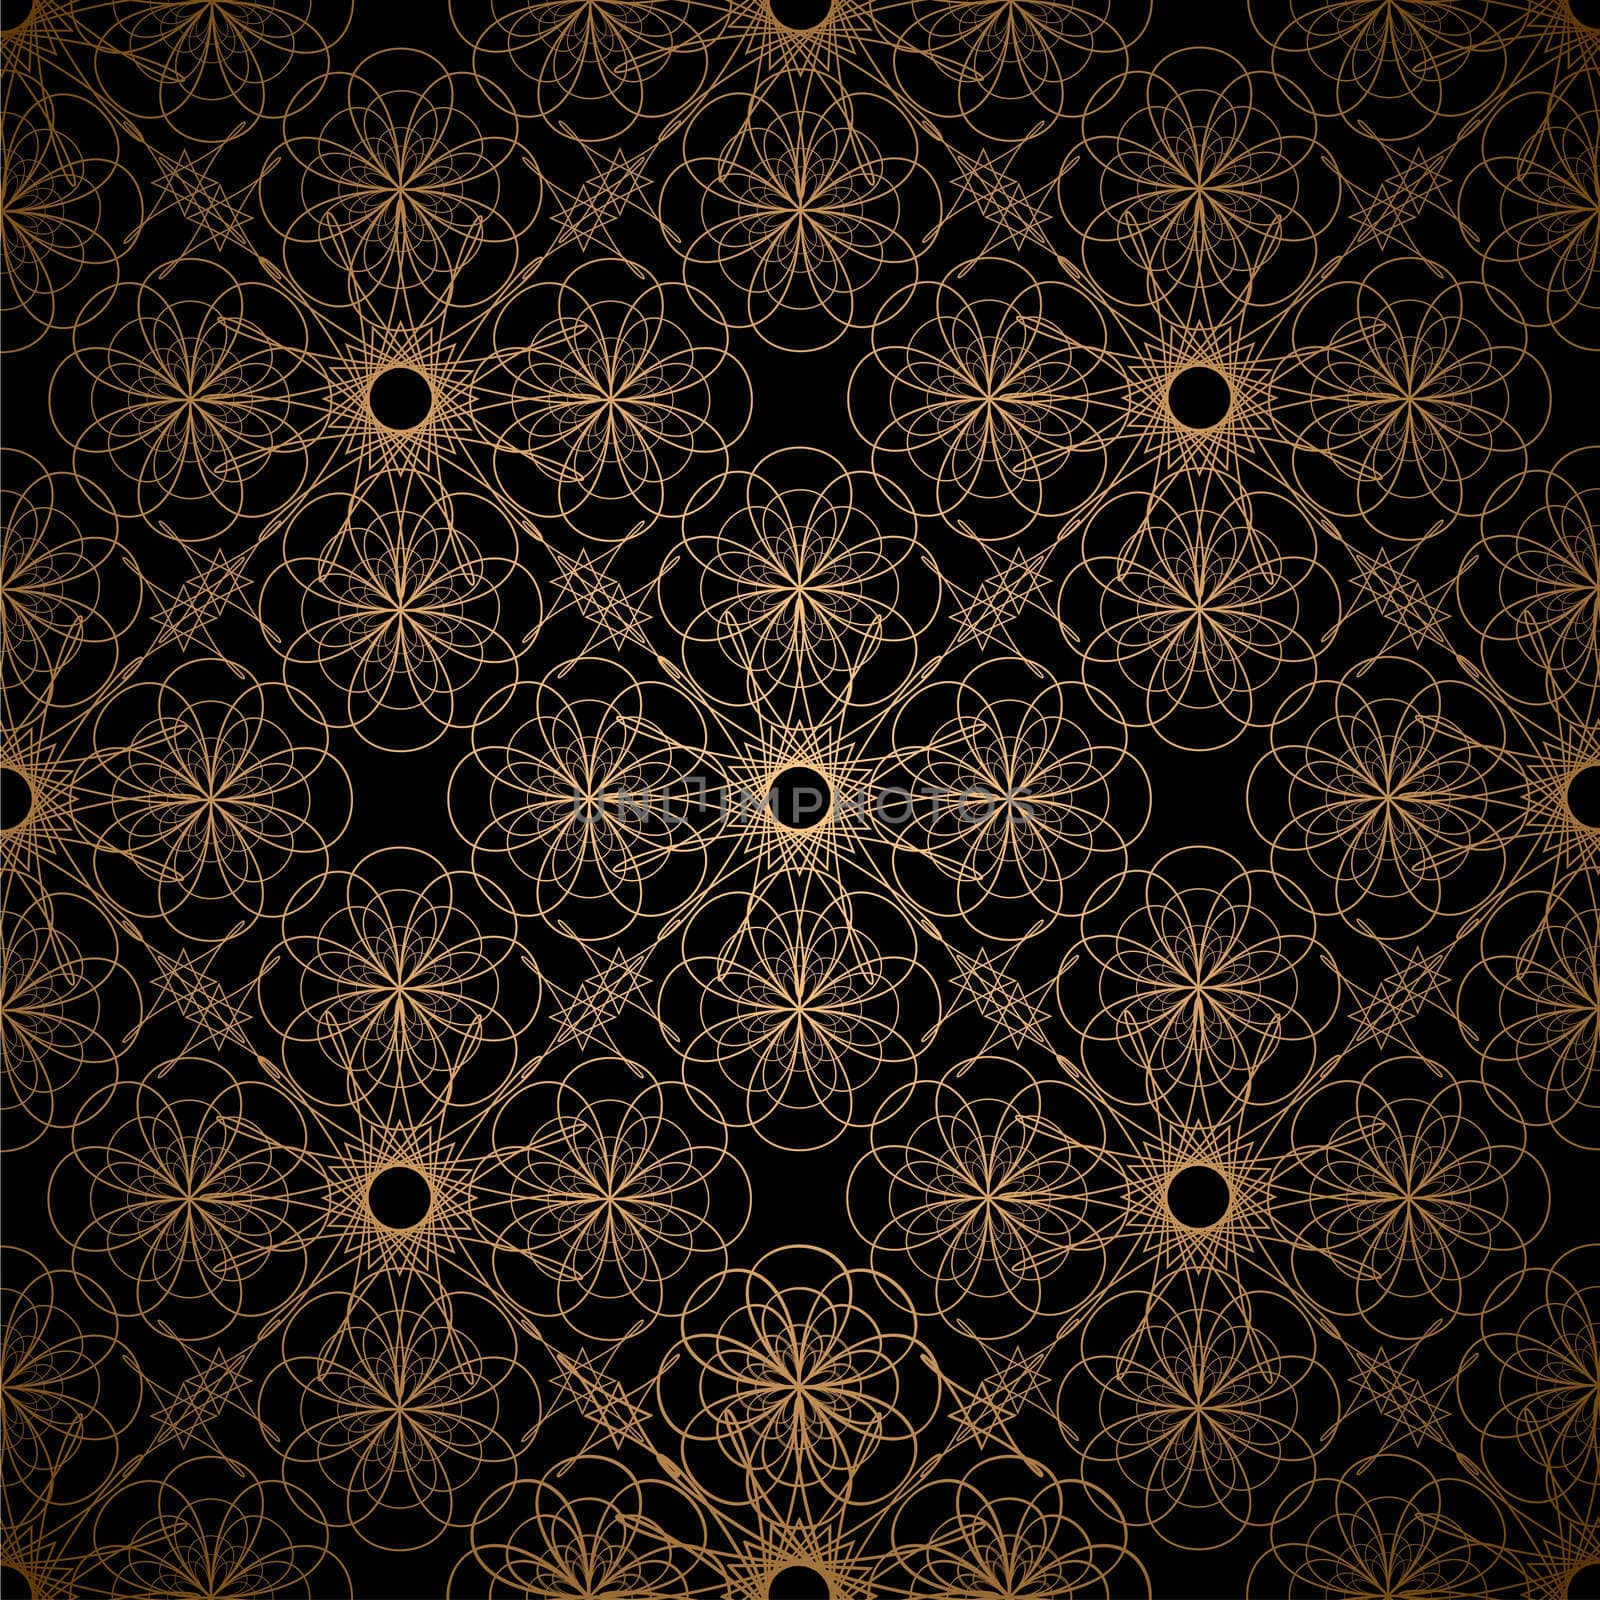 Golden wallpaper abstract spiral background with black pattern